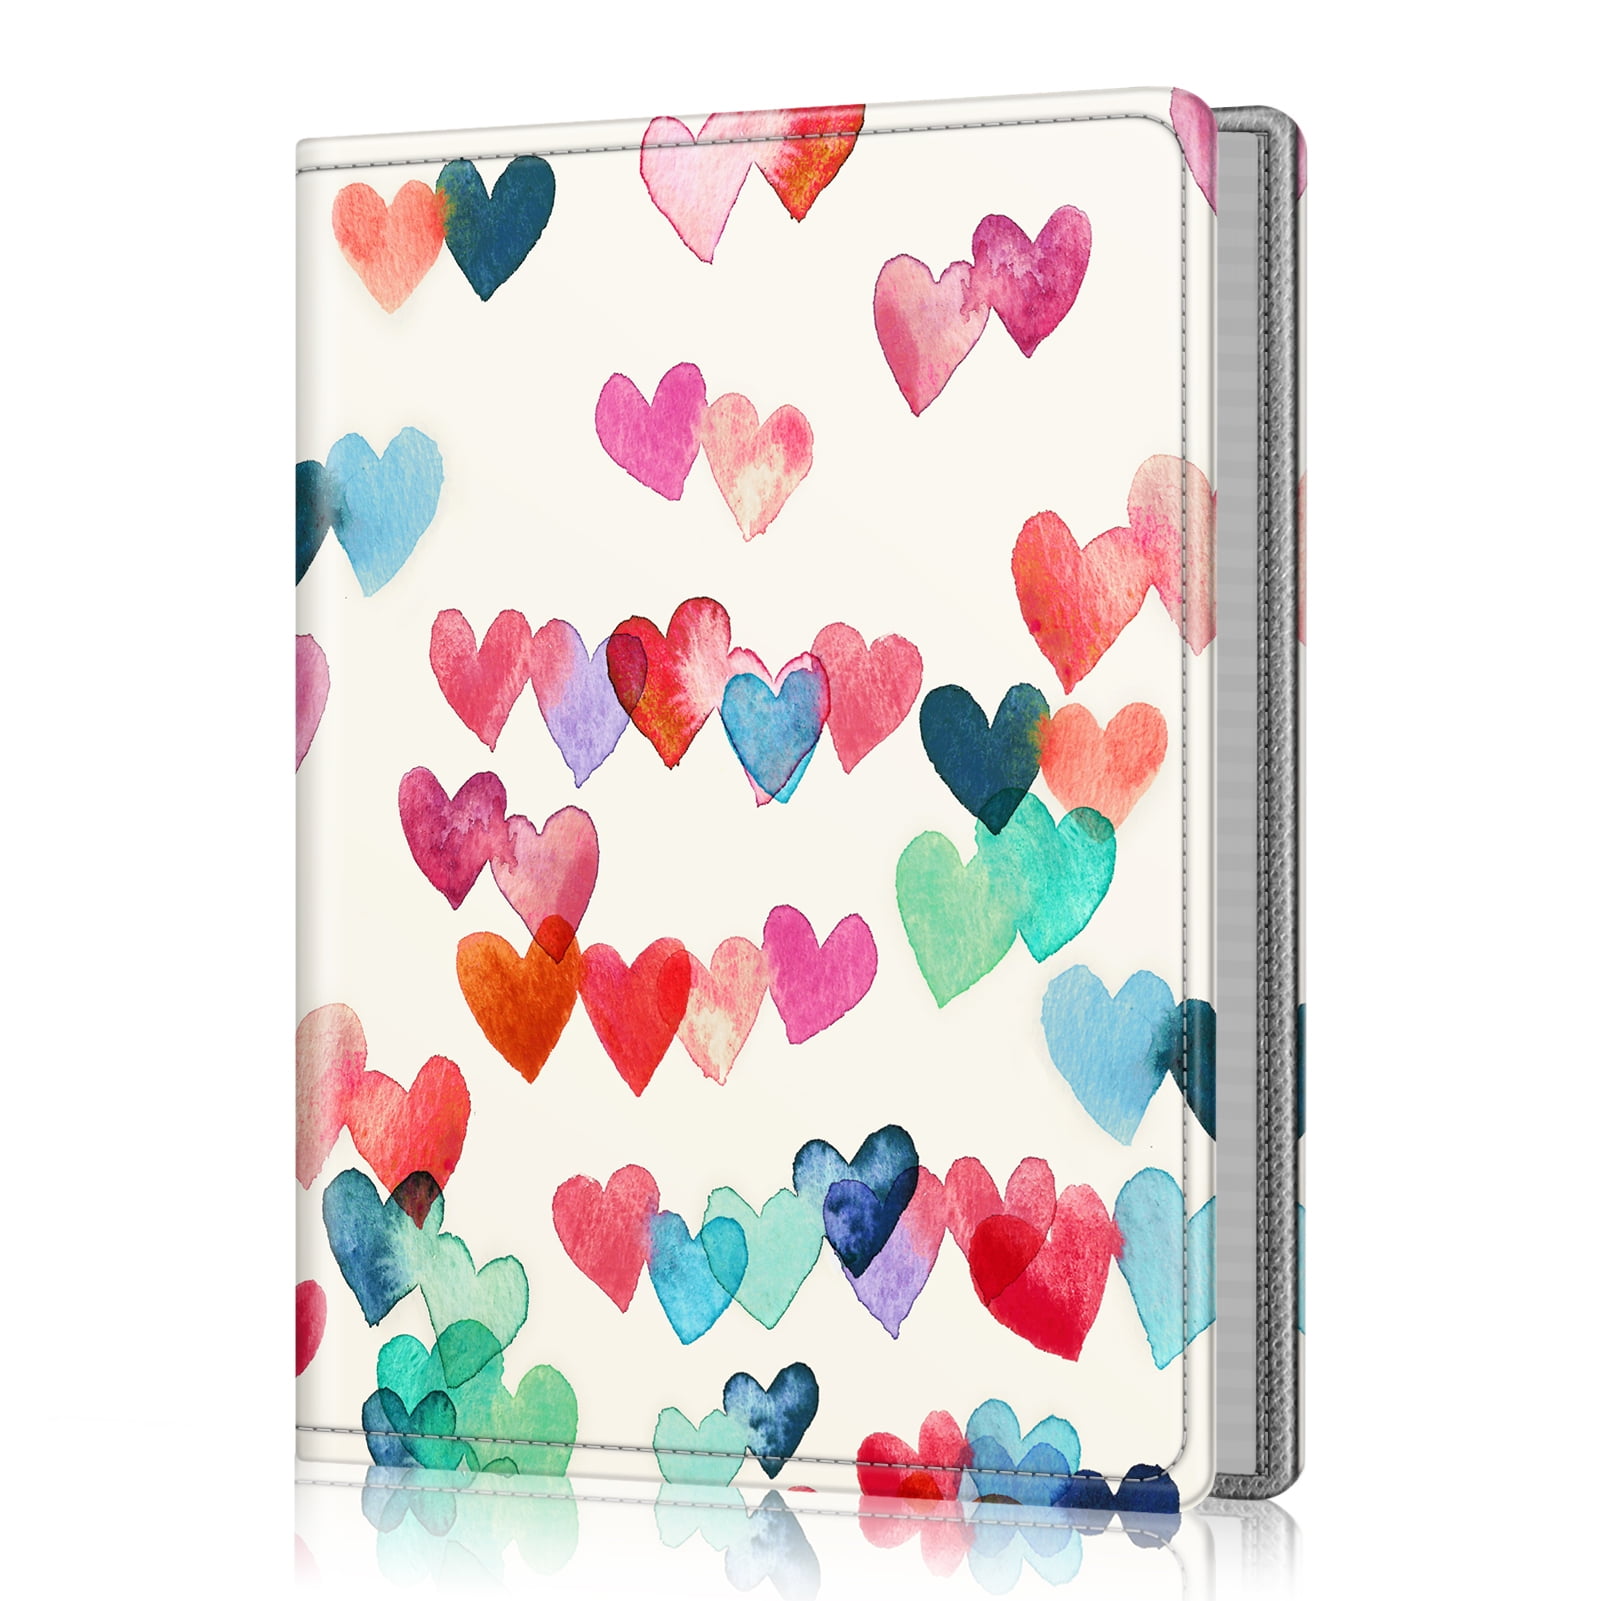 Photo Binder for 5x7 photos, Cover: Creme Vegan Leather